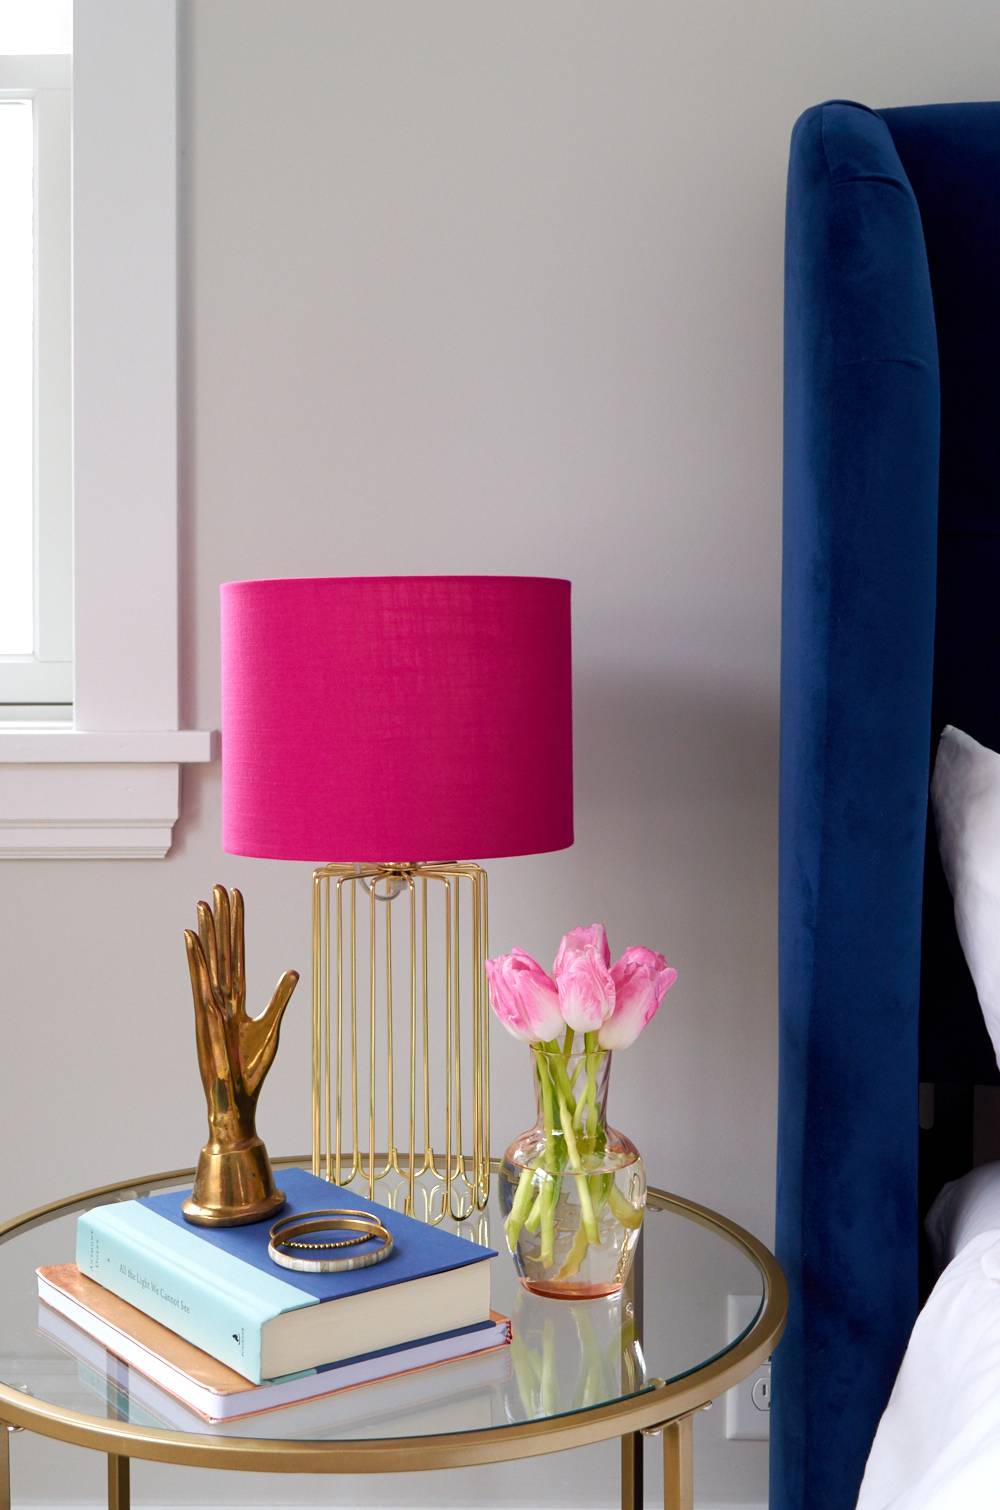 A lamp with a pink shade is sitting on a bedside table with books and trinkets.